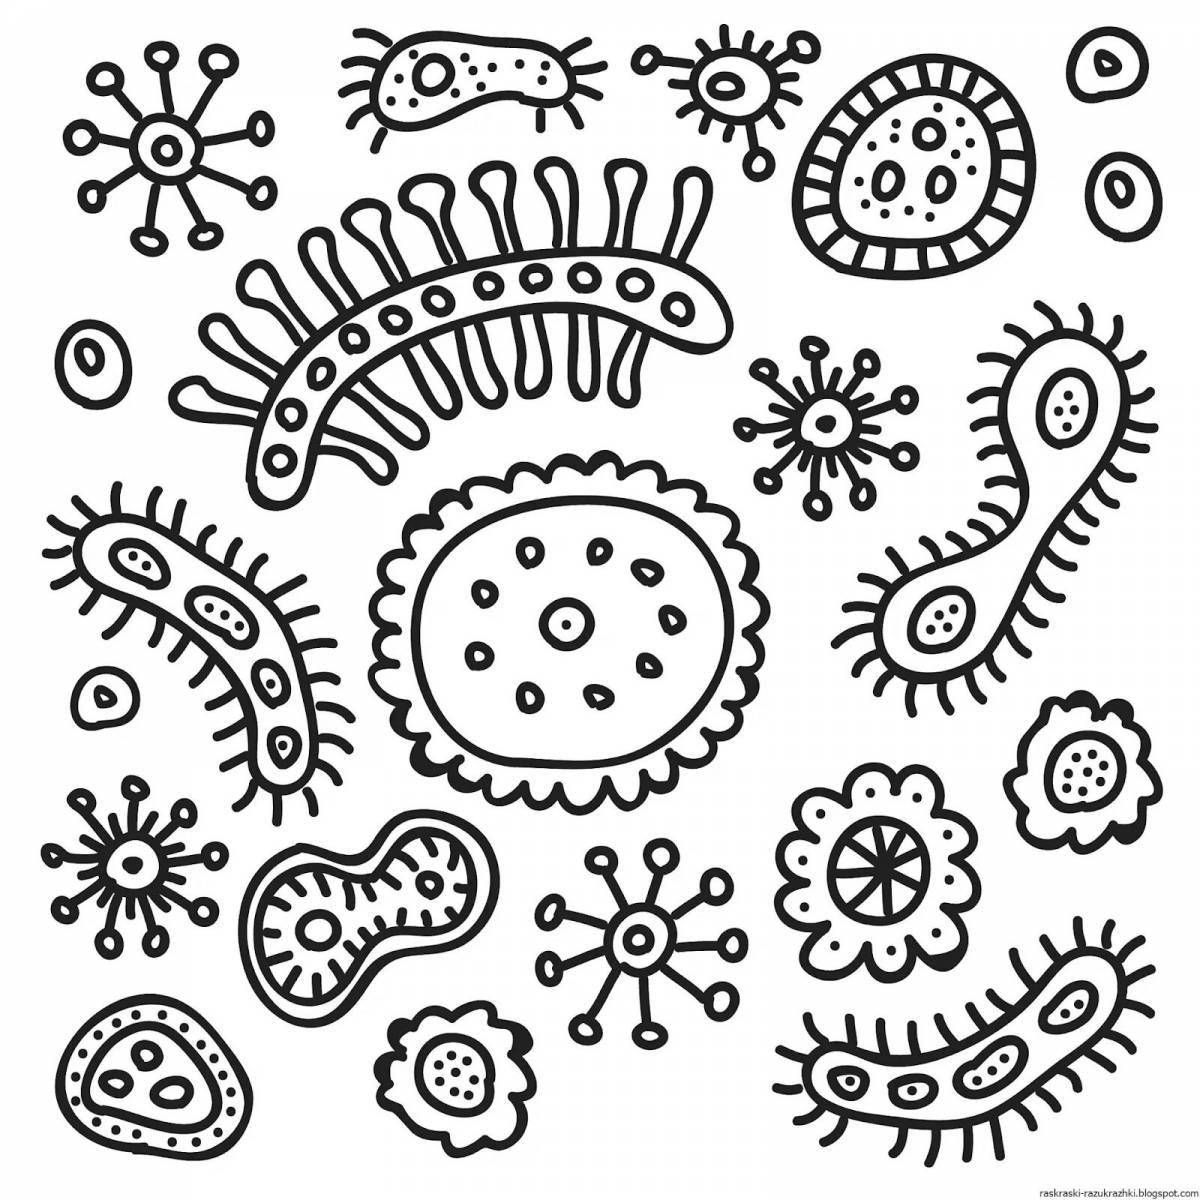 Joyful germs and bacteria coloring page